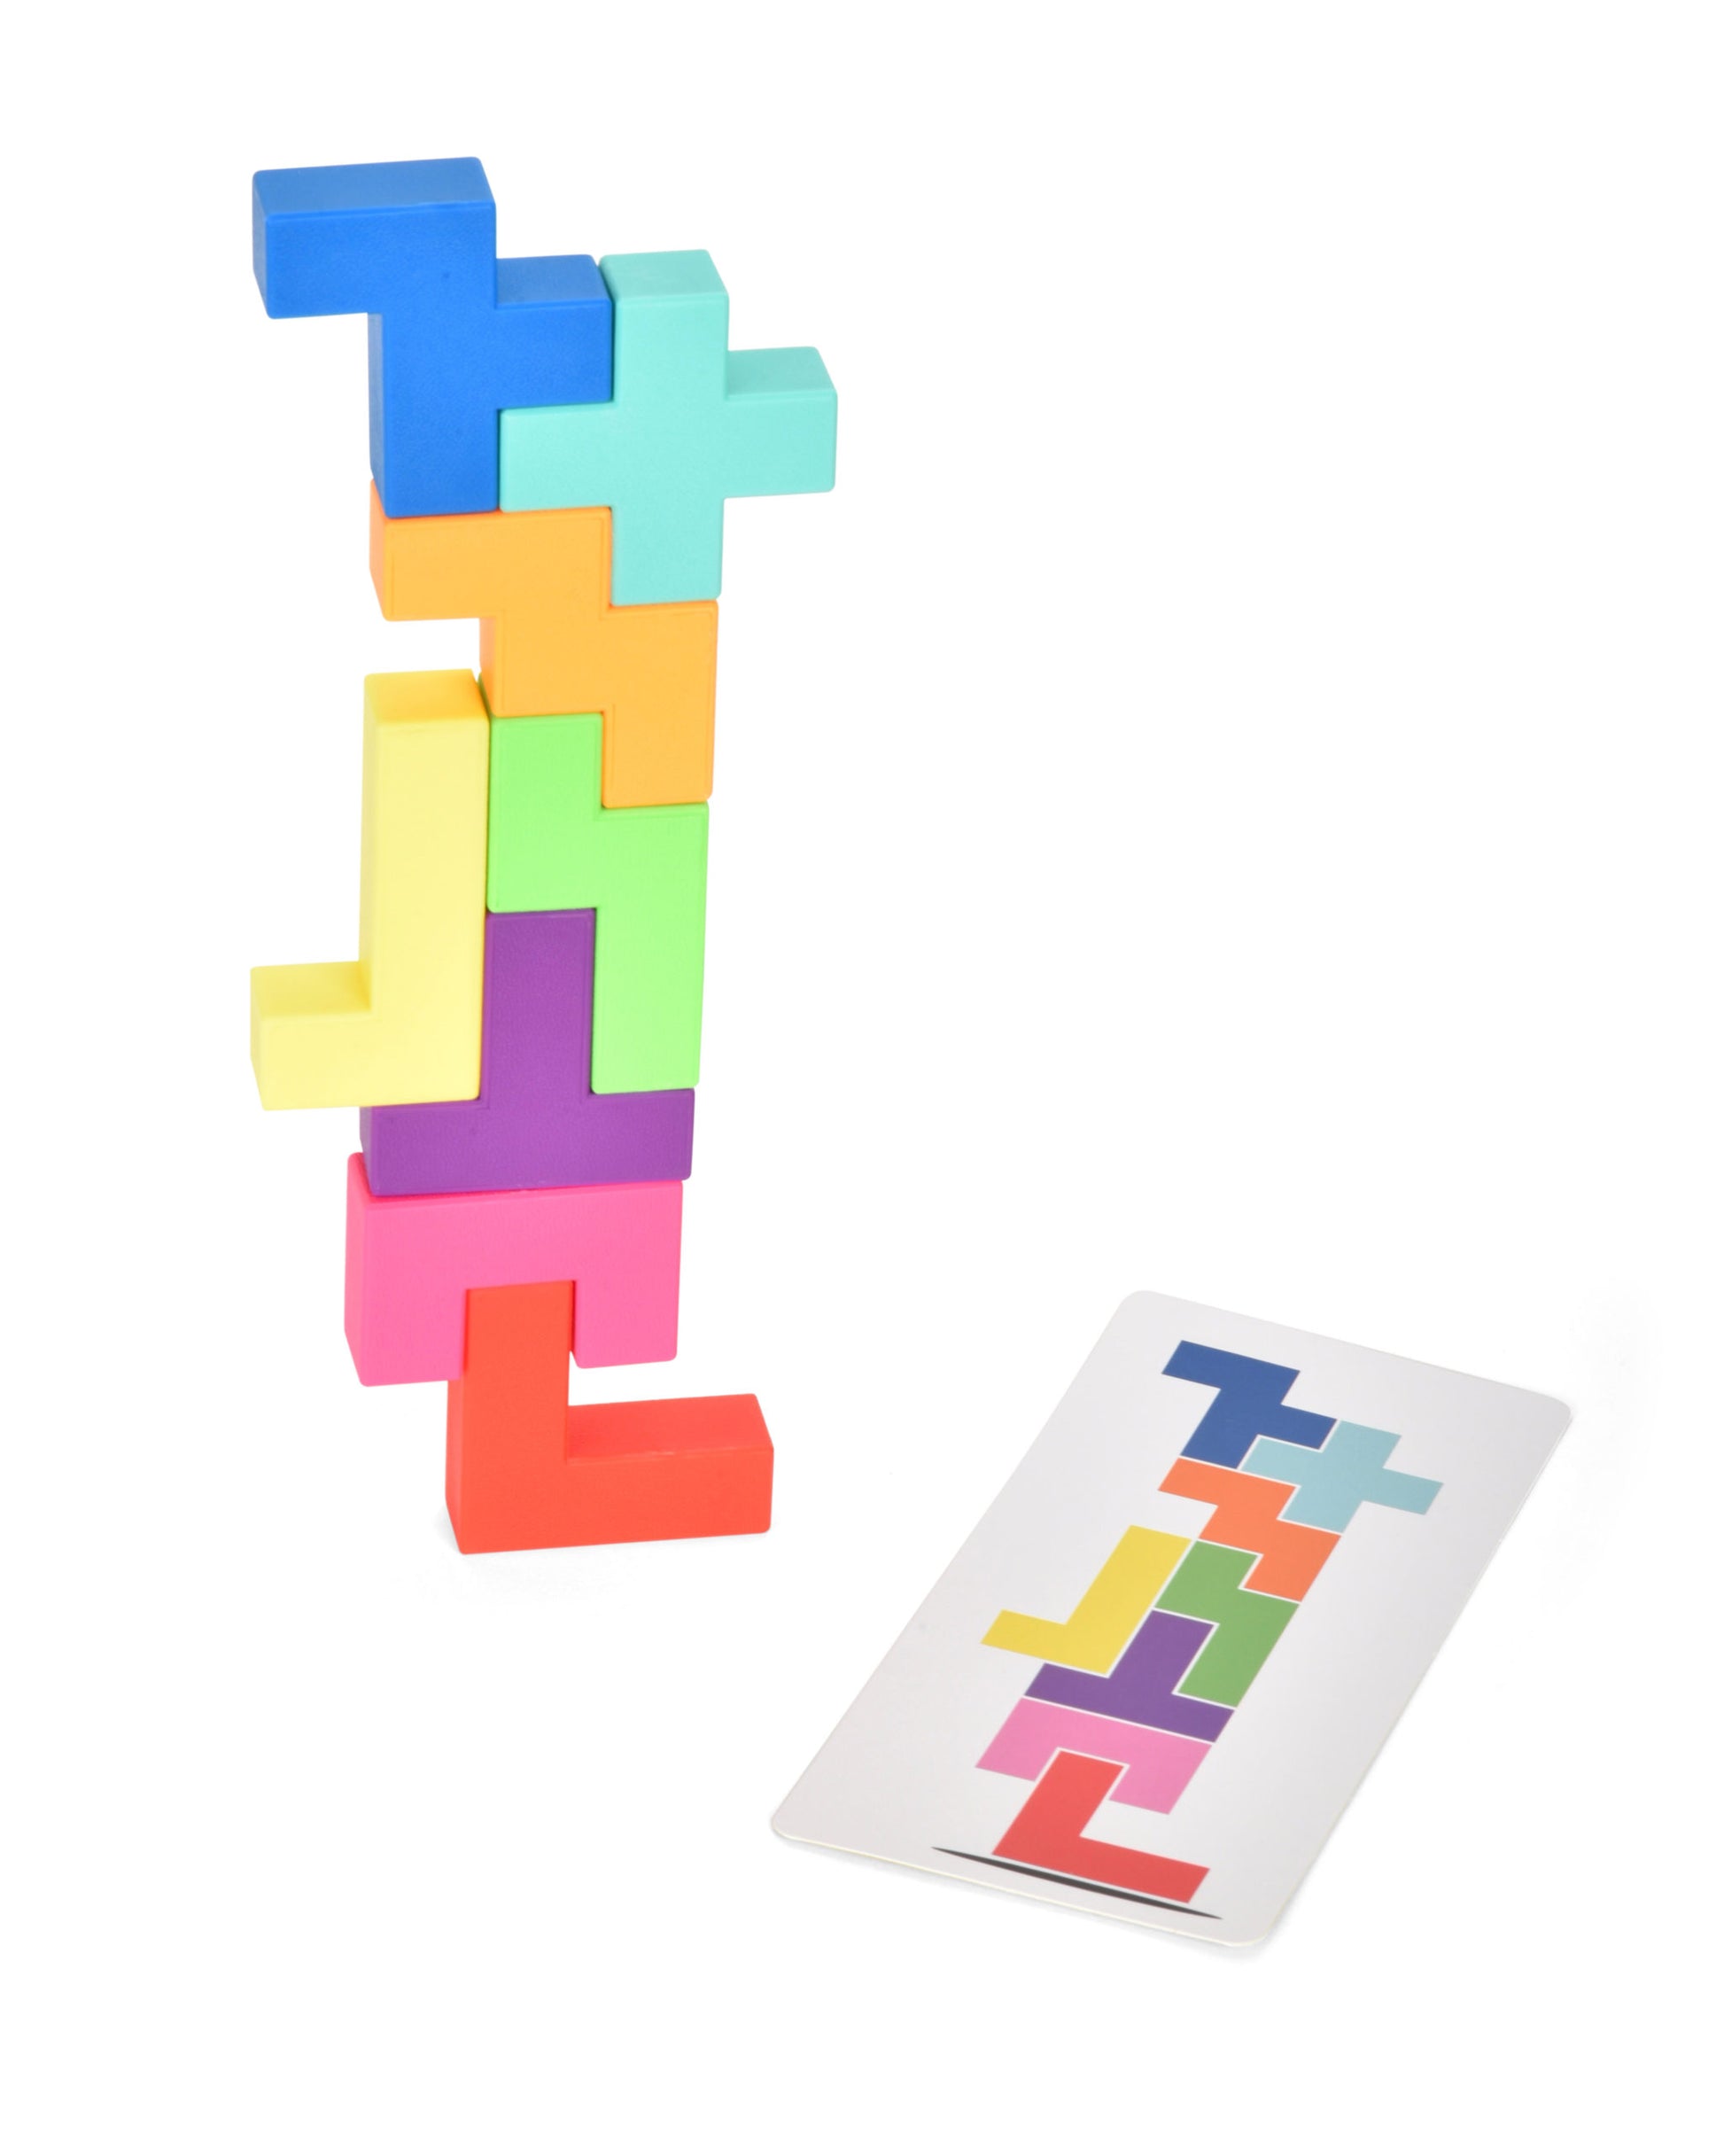 stack of blocks and card on white background.